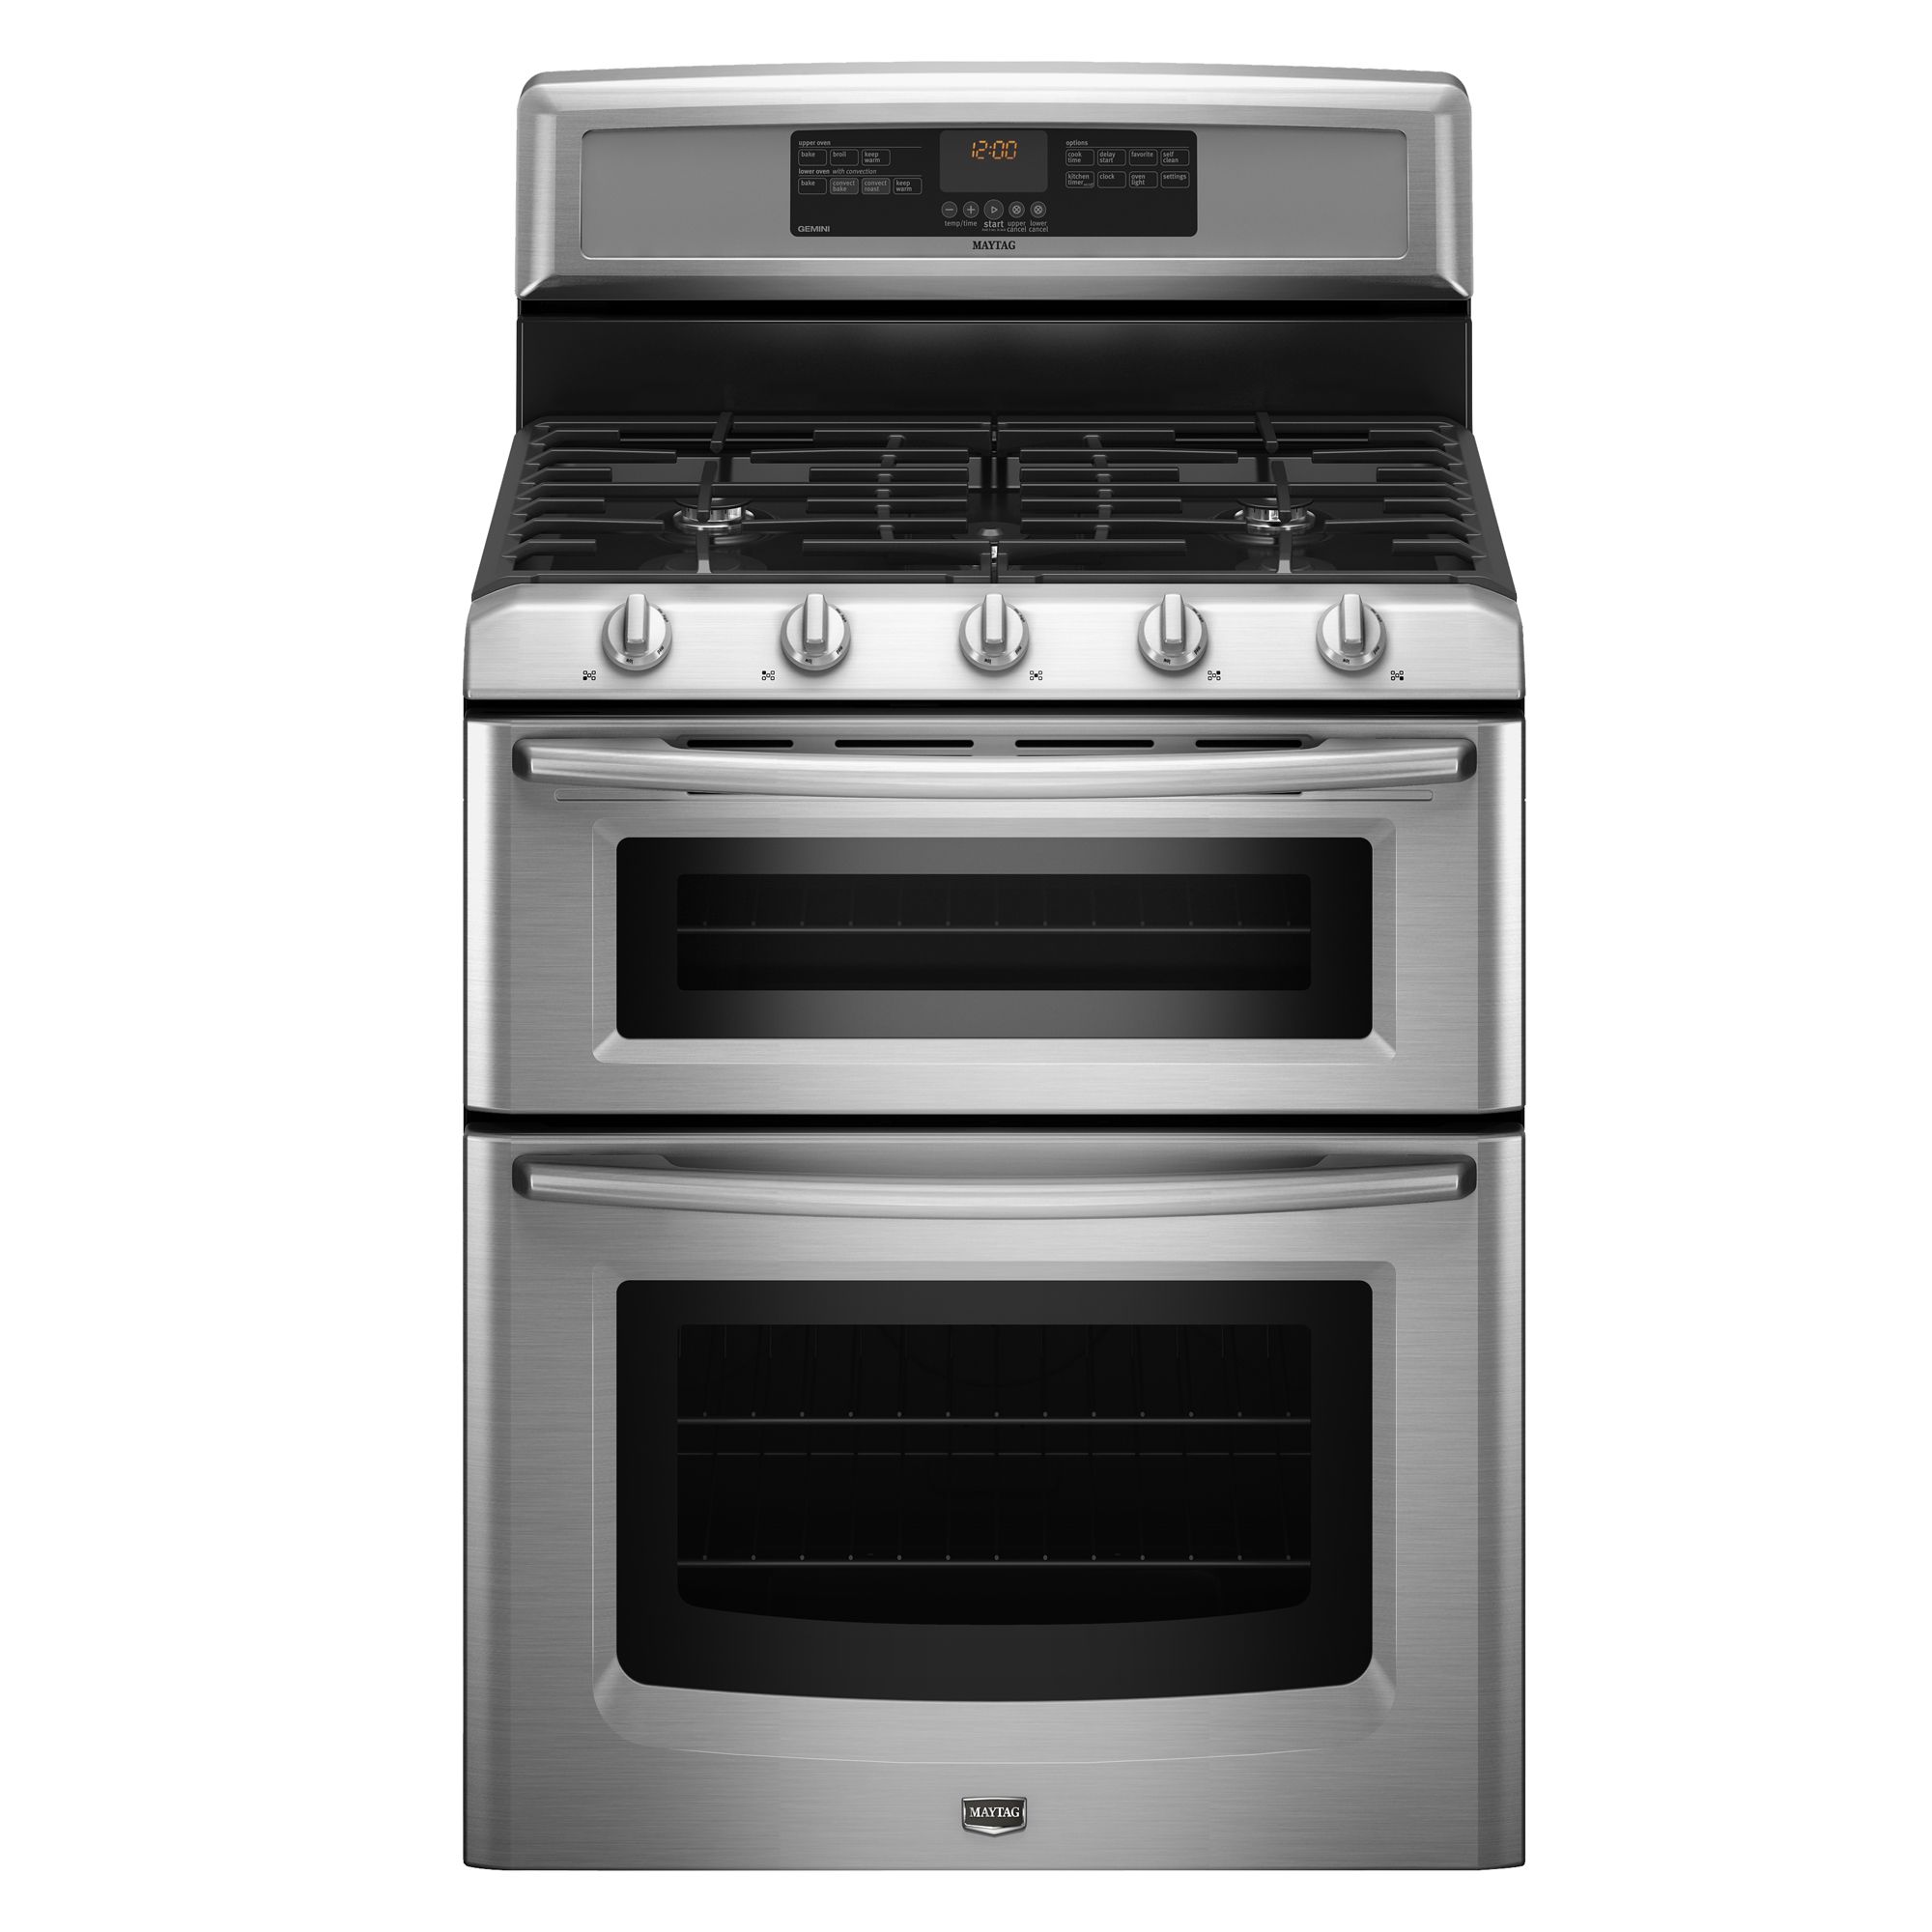 Maytag MGT8775XS 6 cu. ft. DoubleOven Gas Range Stainless Steel